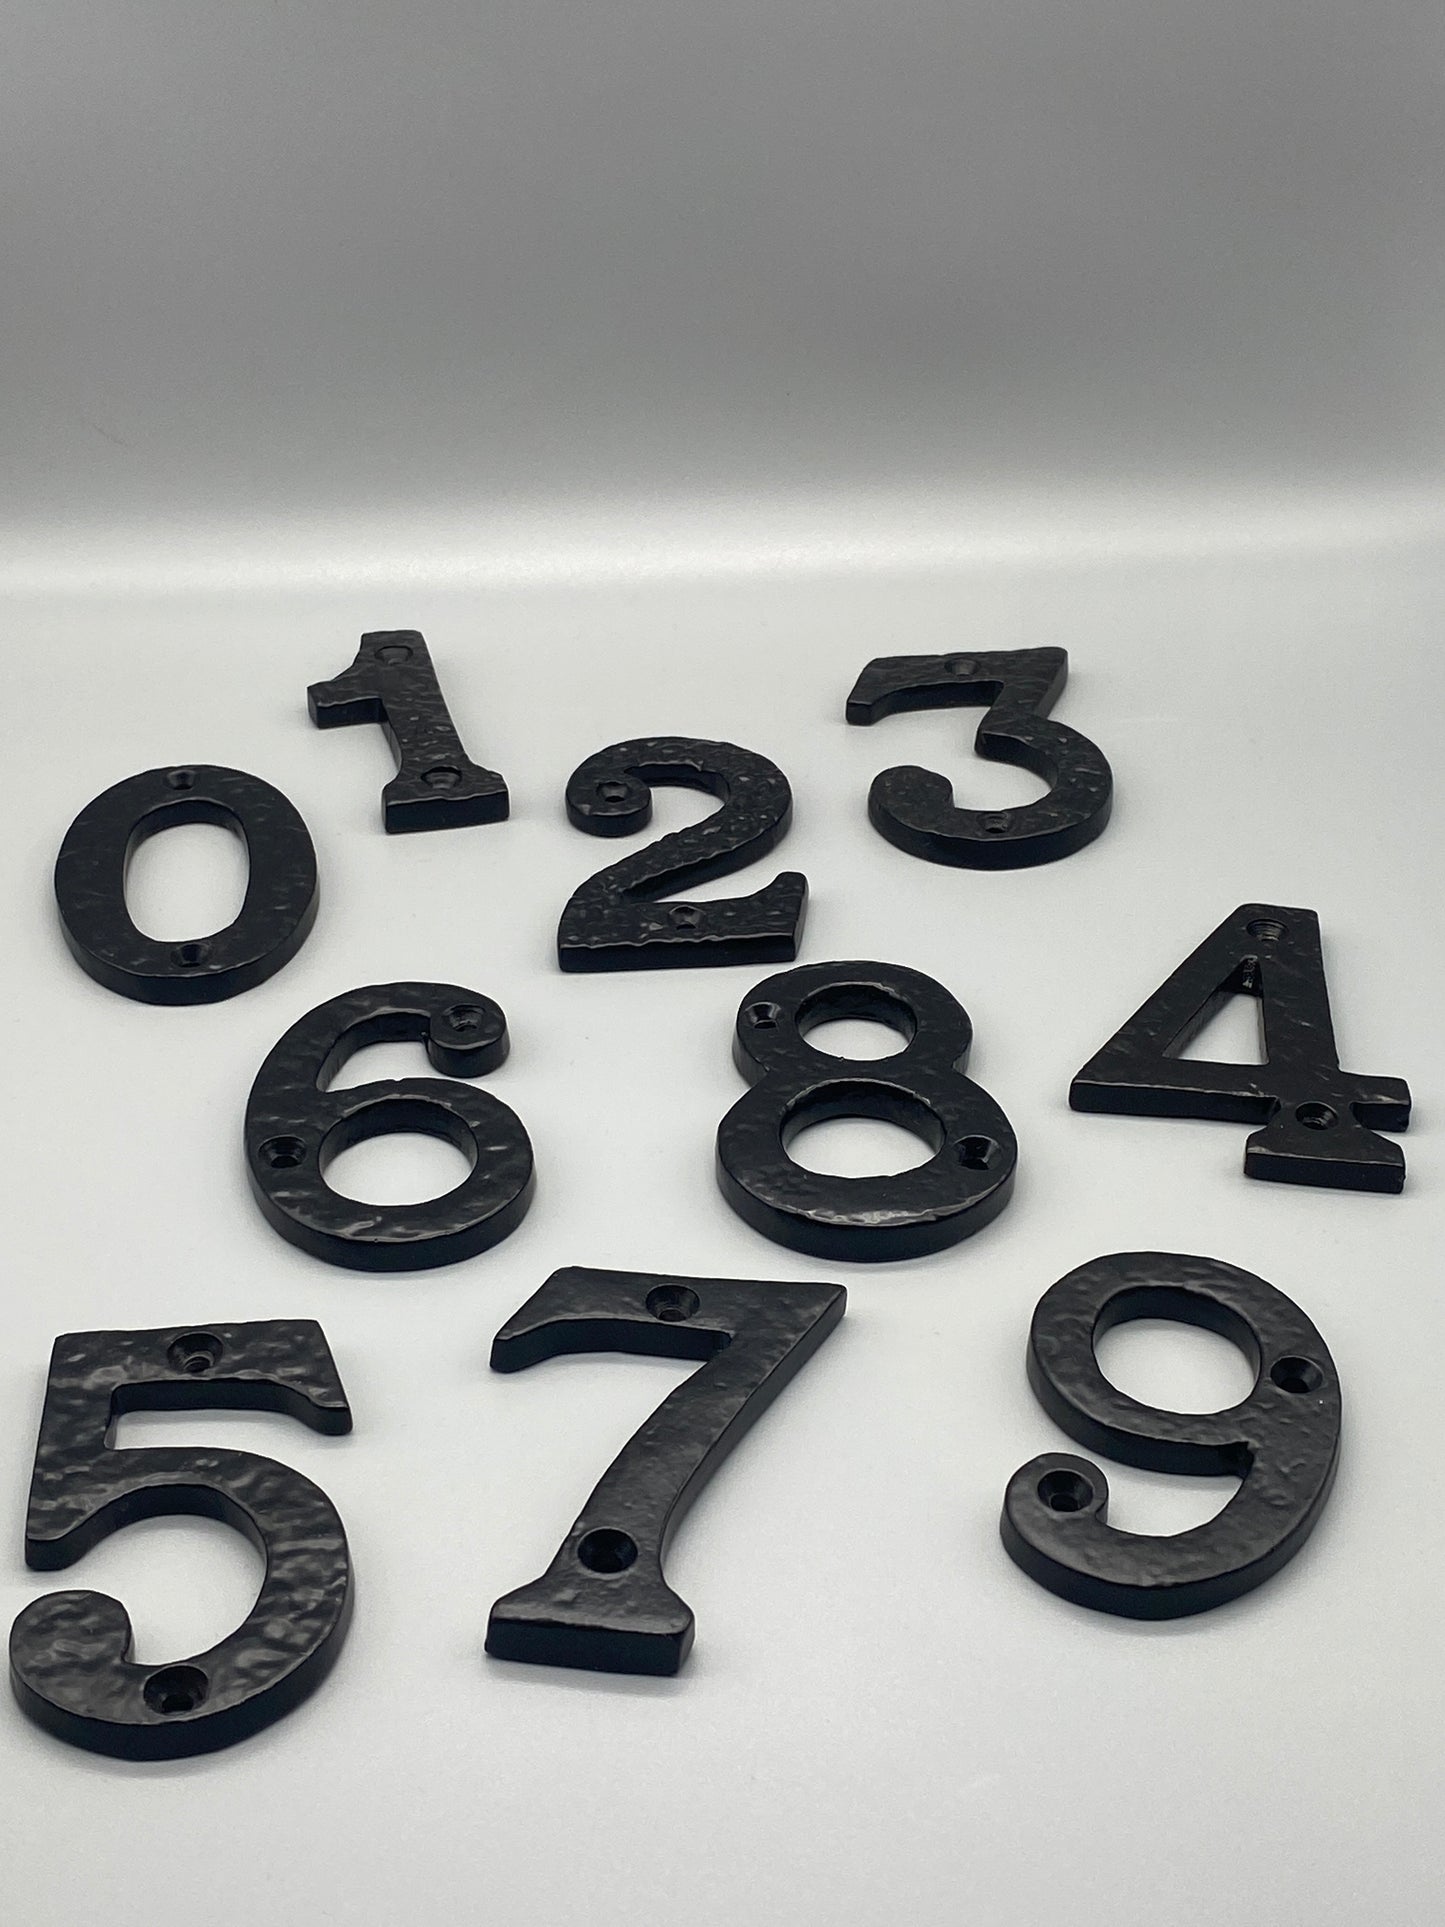 Forged Black Numerals - Solid Door Numbers - 75mm (4" inch) - Black Finish